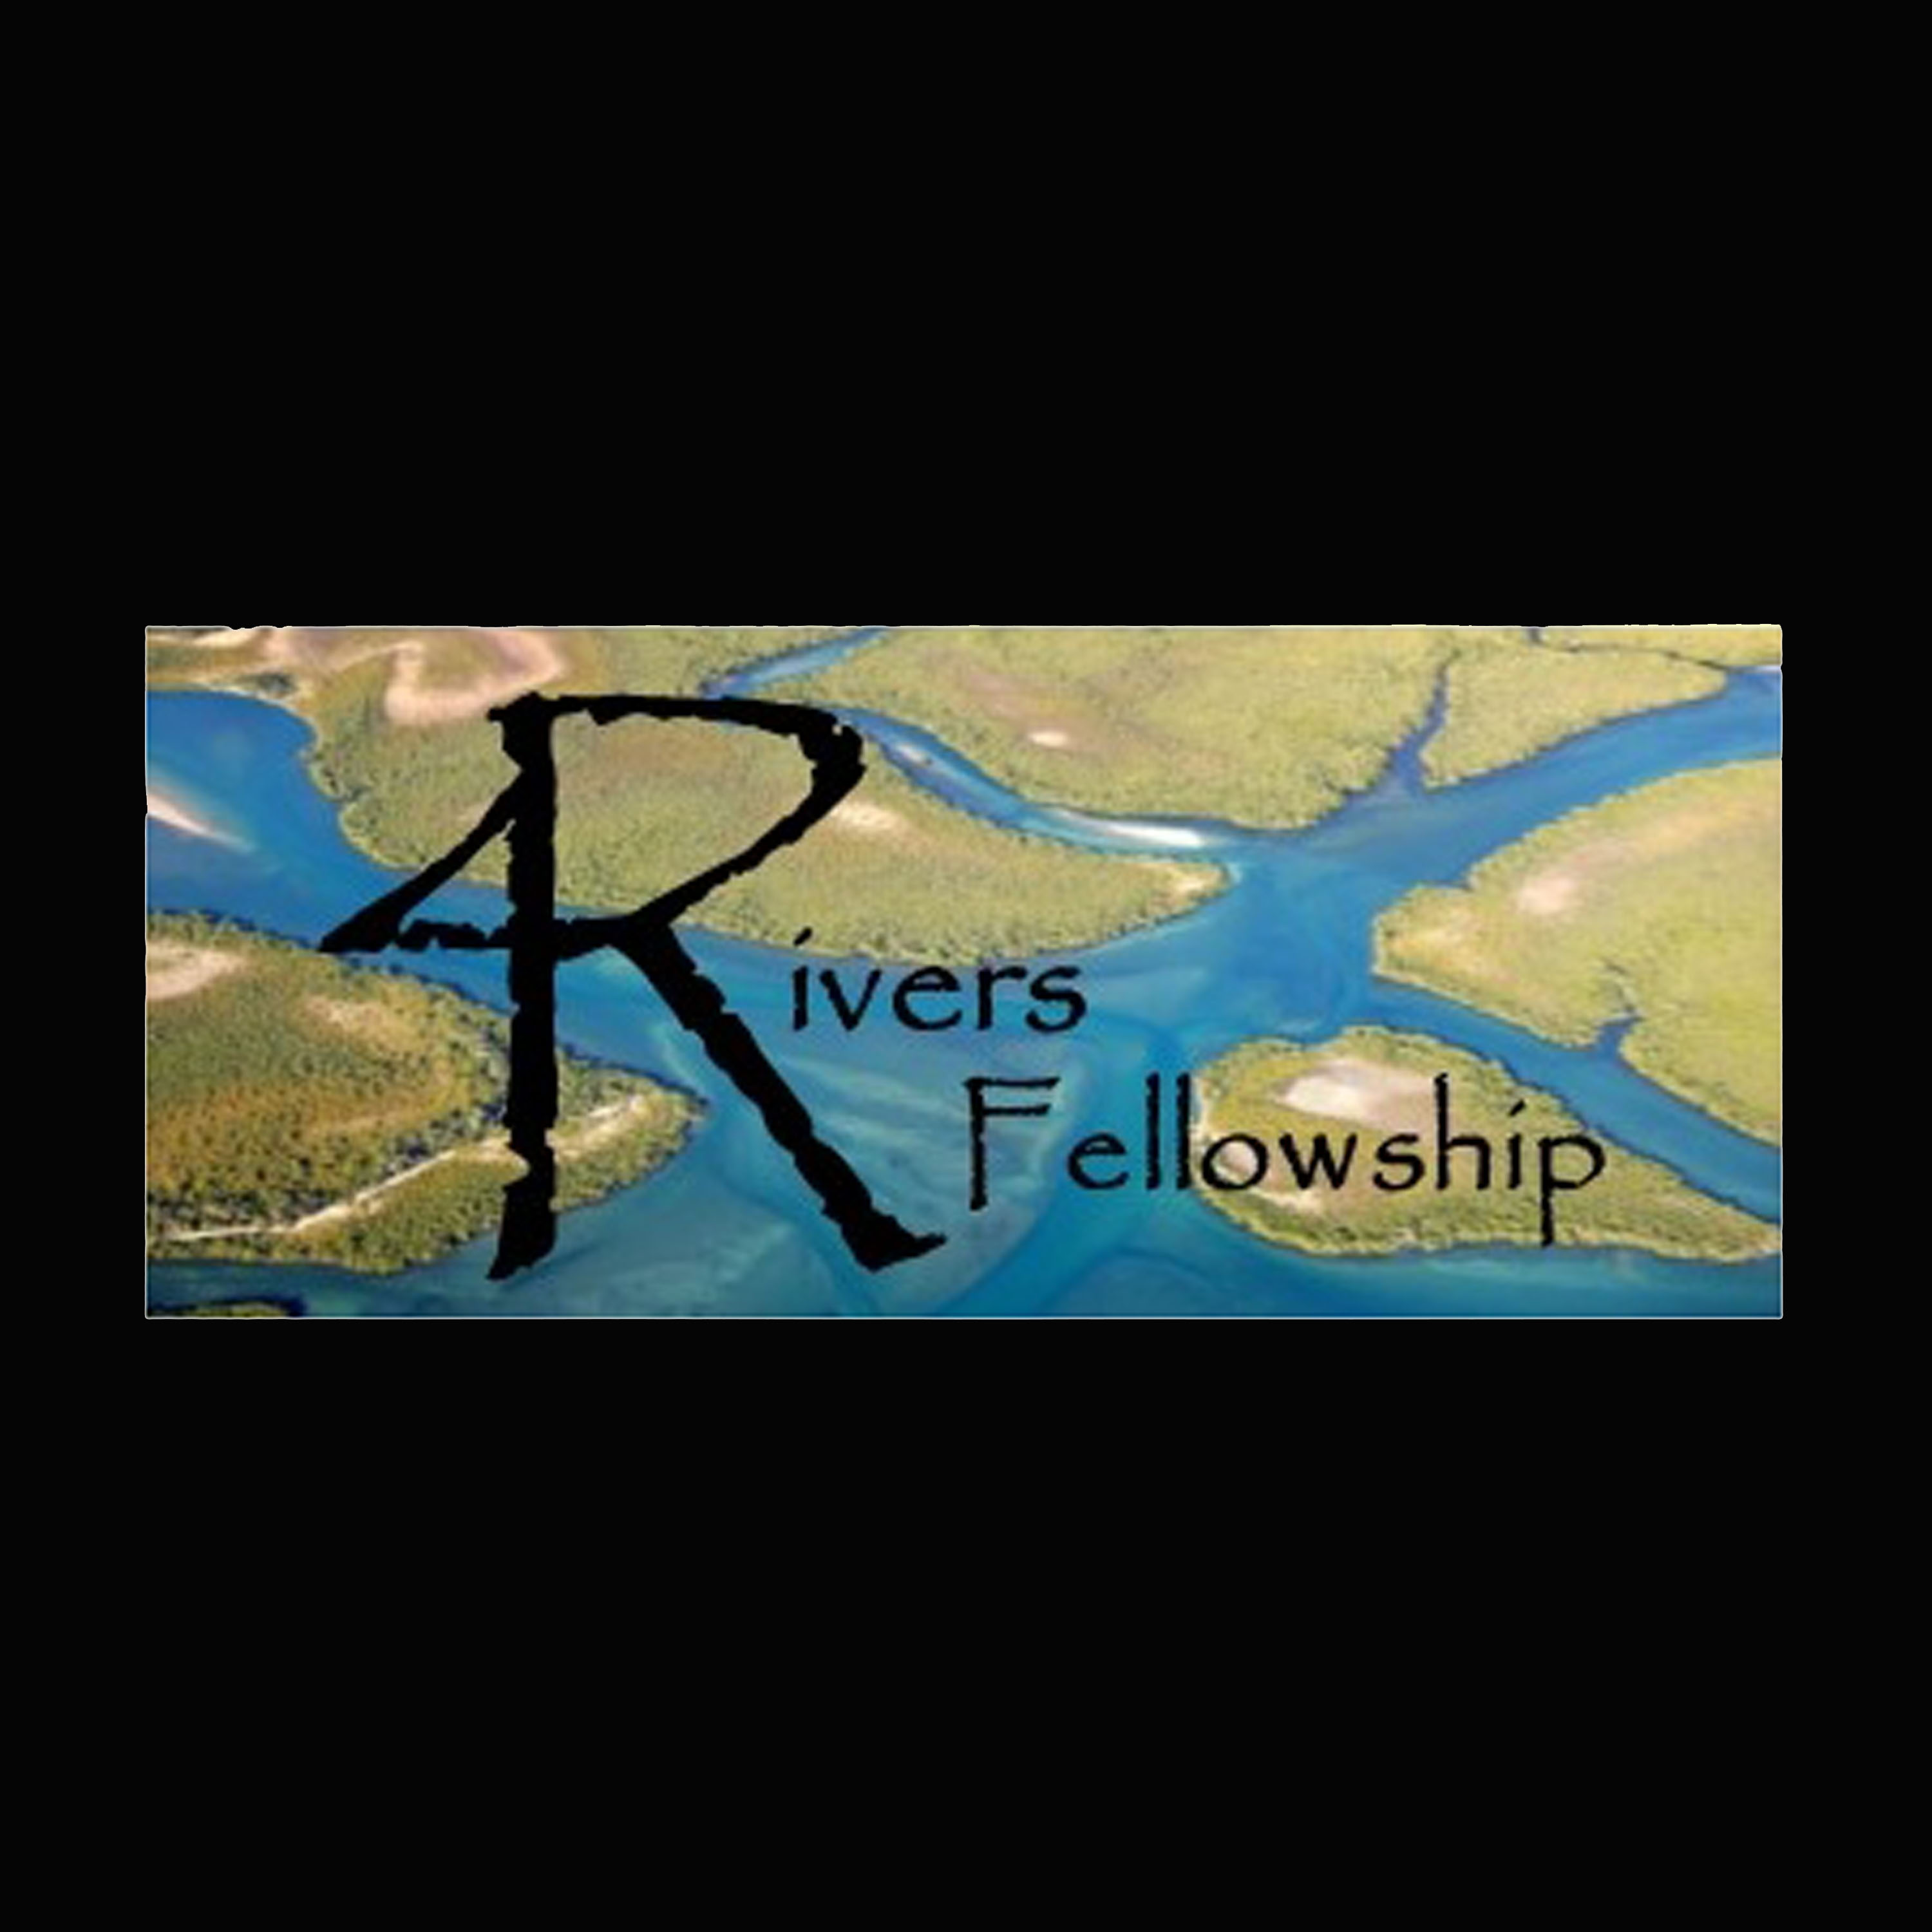 The 4 Rivers Fellowship's Podcast